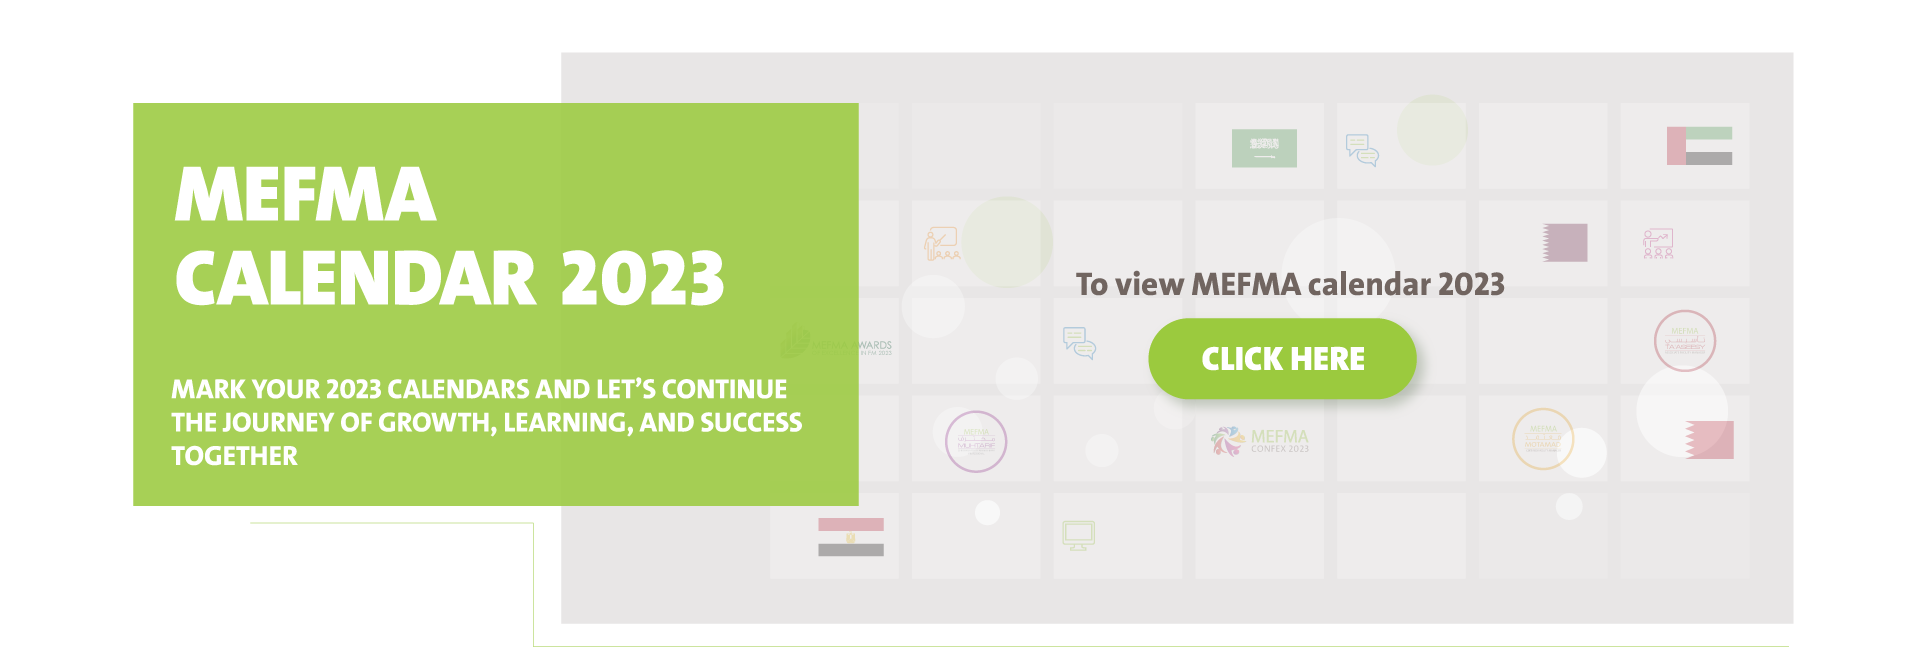 MEFMA calendar 2023 full of growth, learning and success. Training courses and events in the middle east.